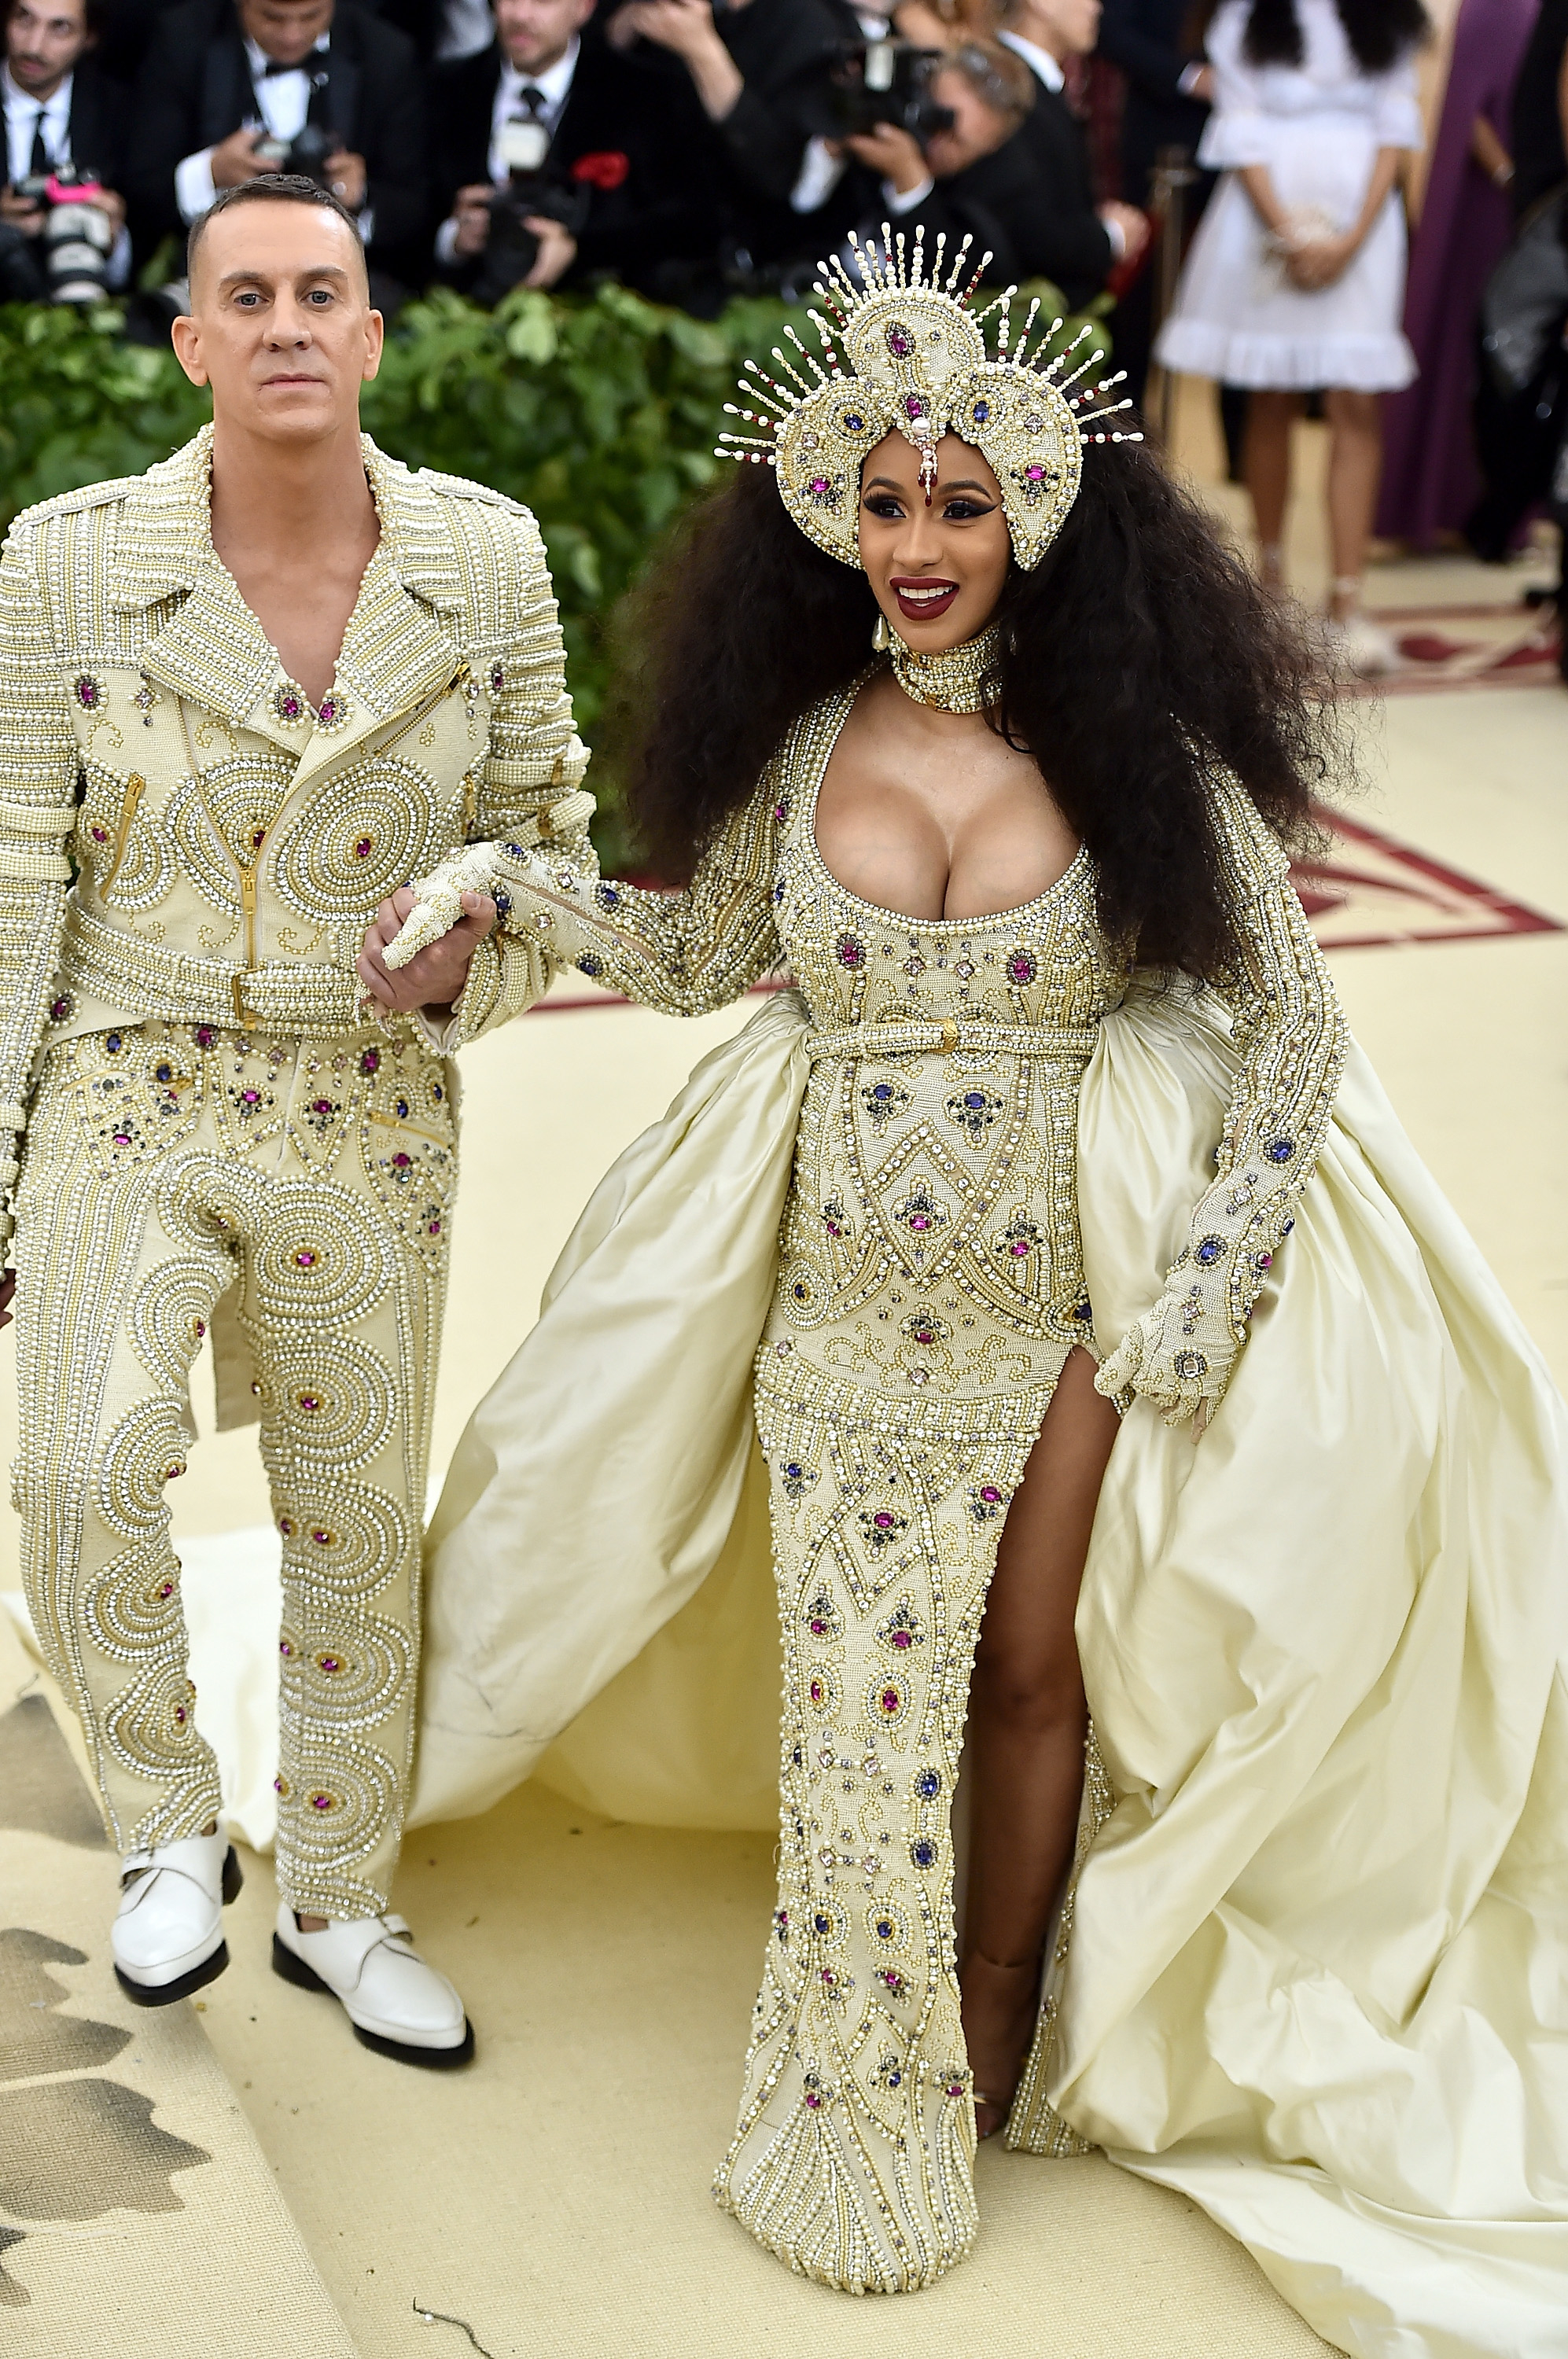 Two people on a red carpet; one in a bejeweled suit, the other in an ornate headdress and gown with a high slit